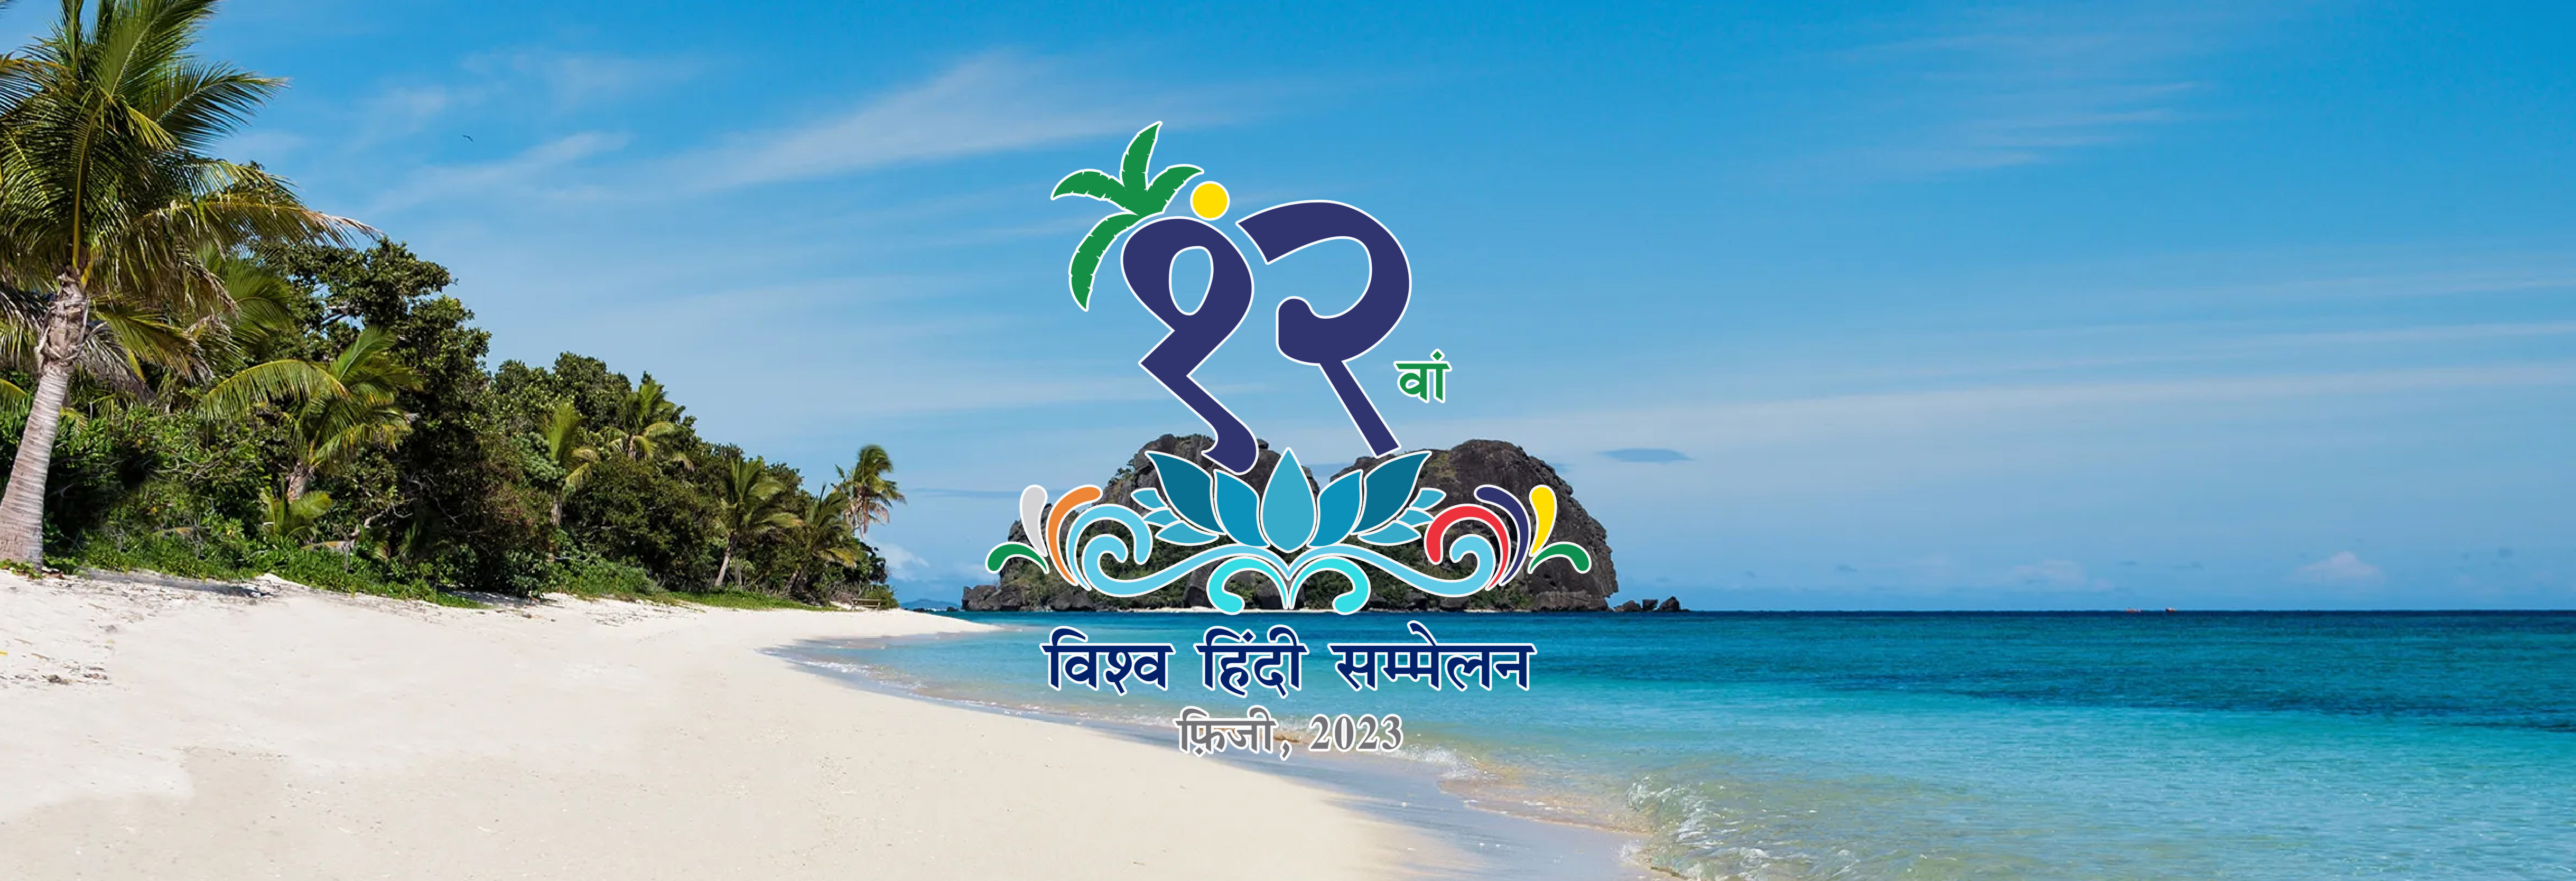 12th World Hindi Conference is being organized in Fiji from 15-17 February 2023